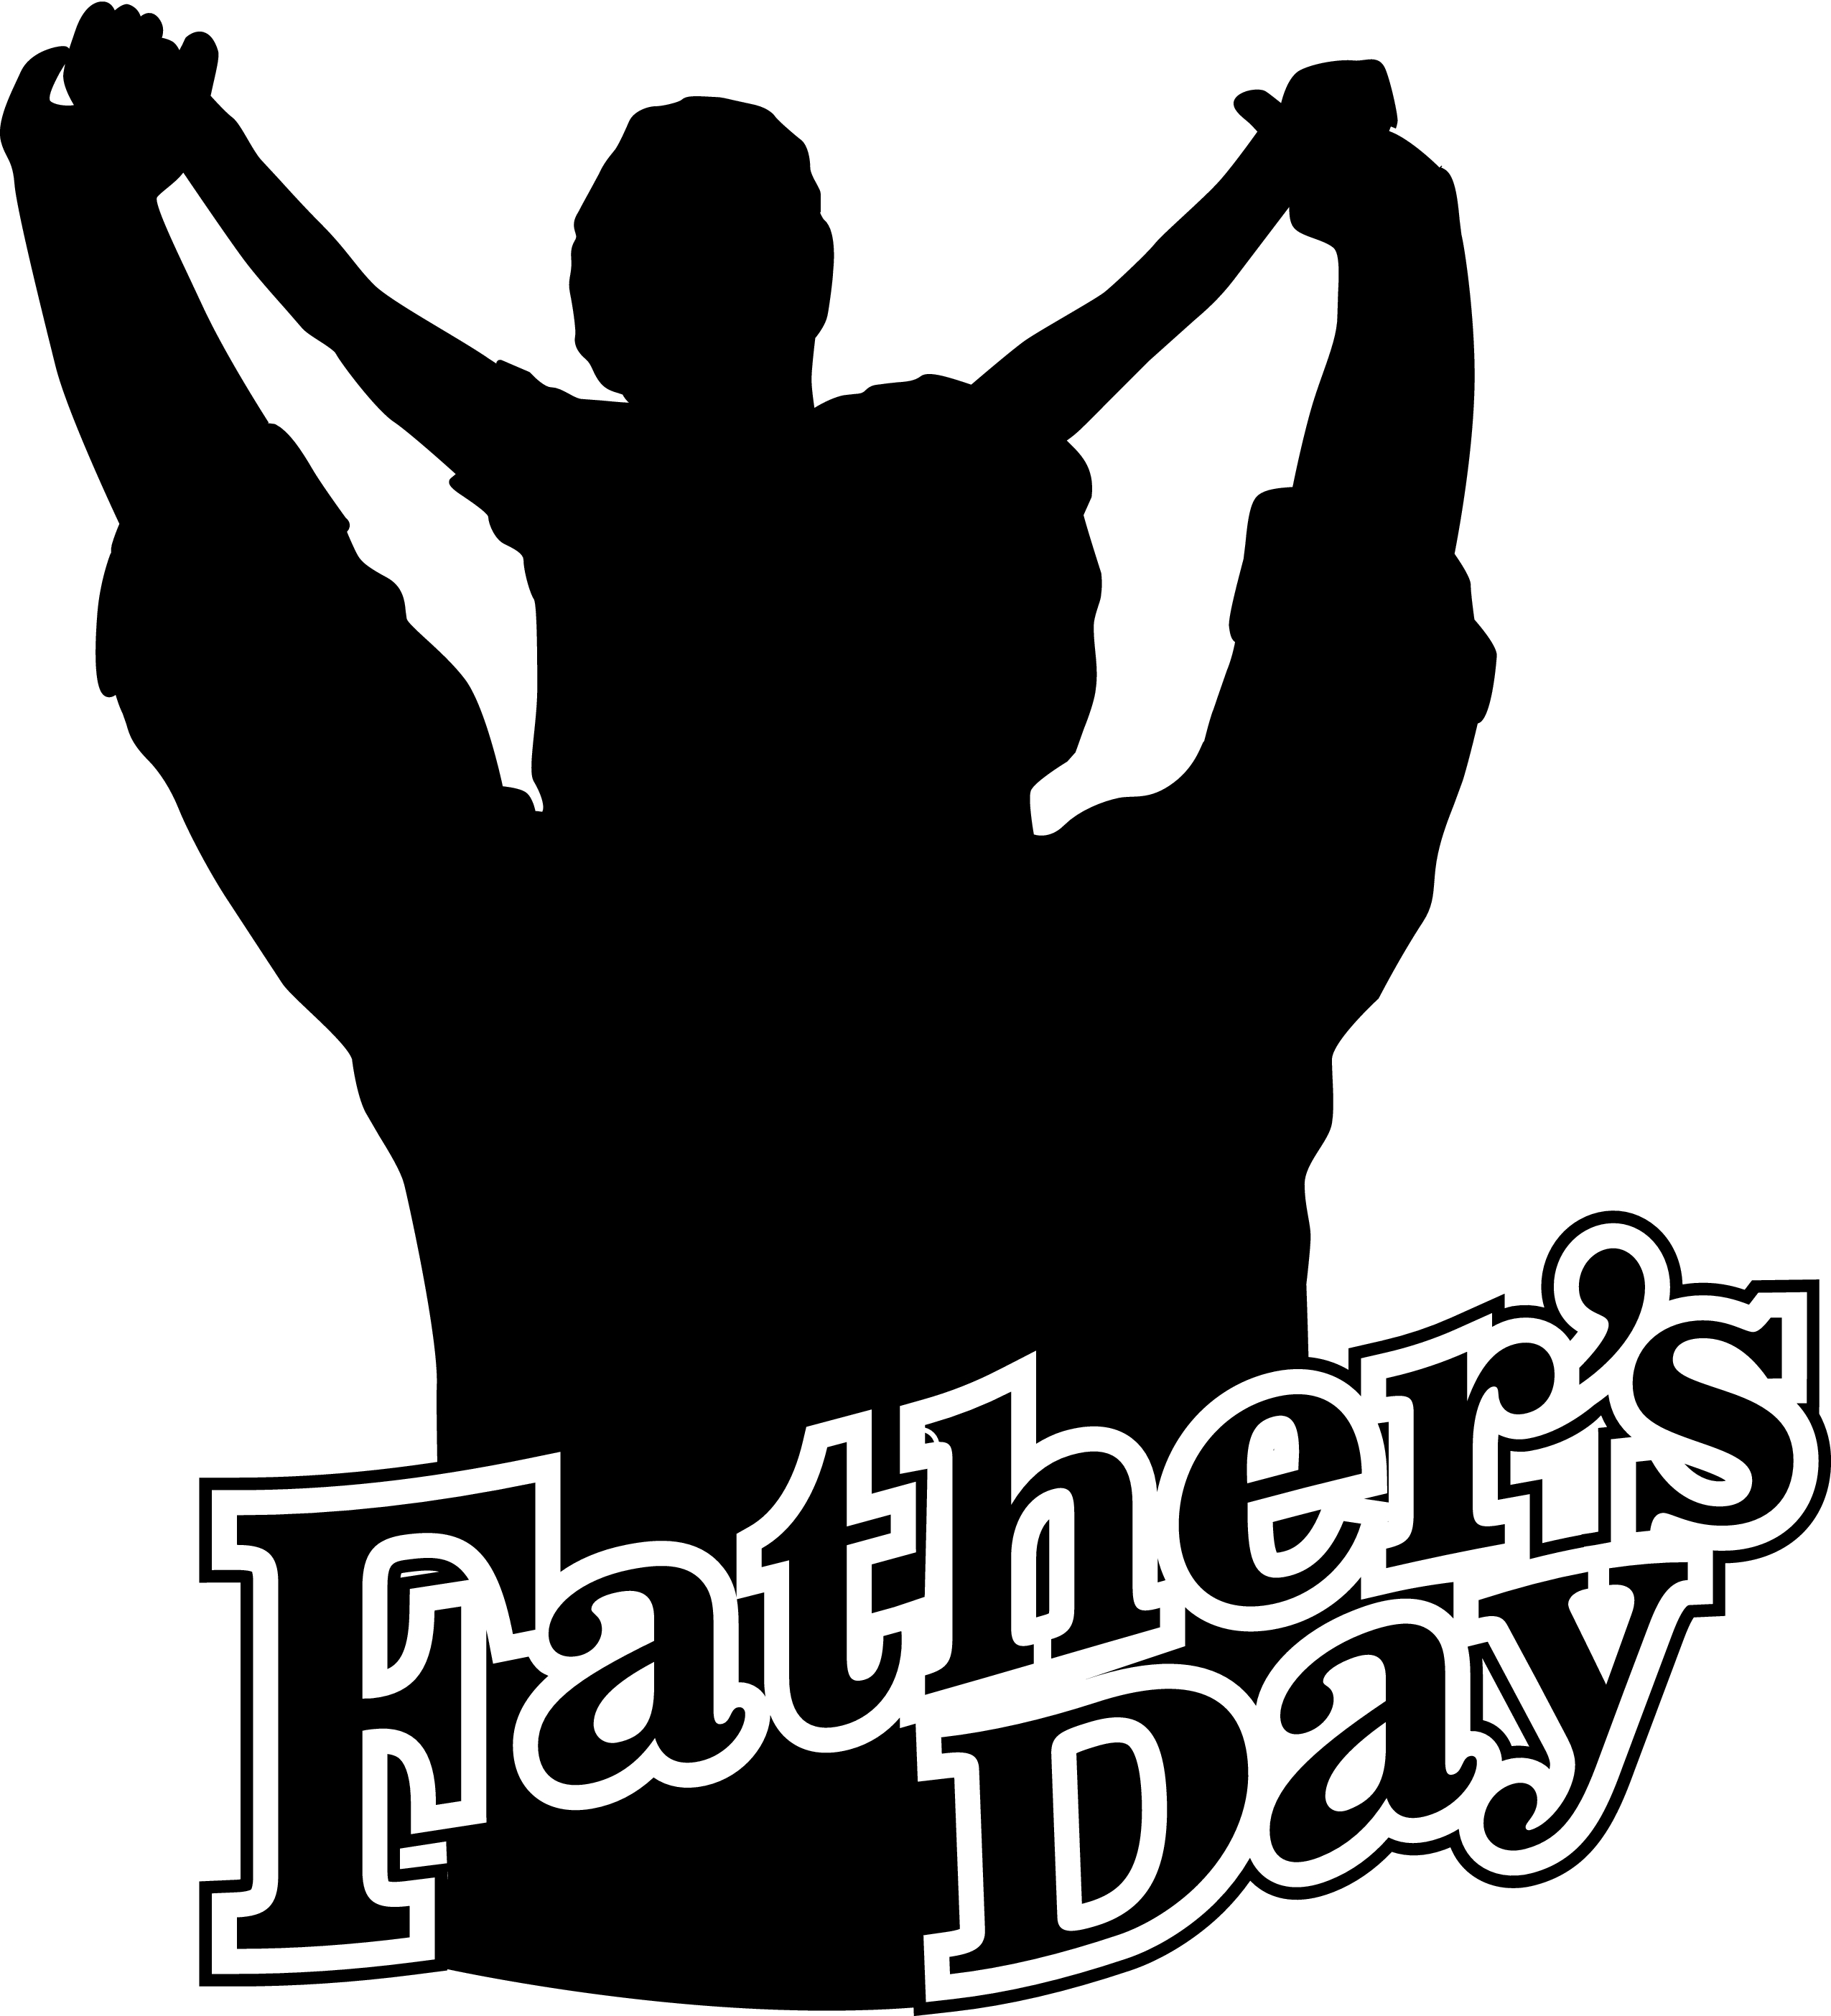 free black and white father's day clip art - photo #14